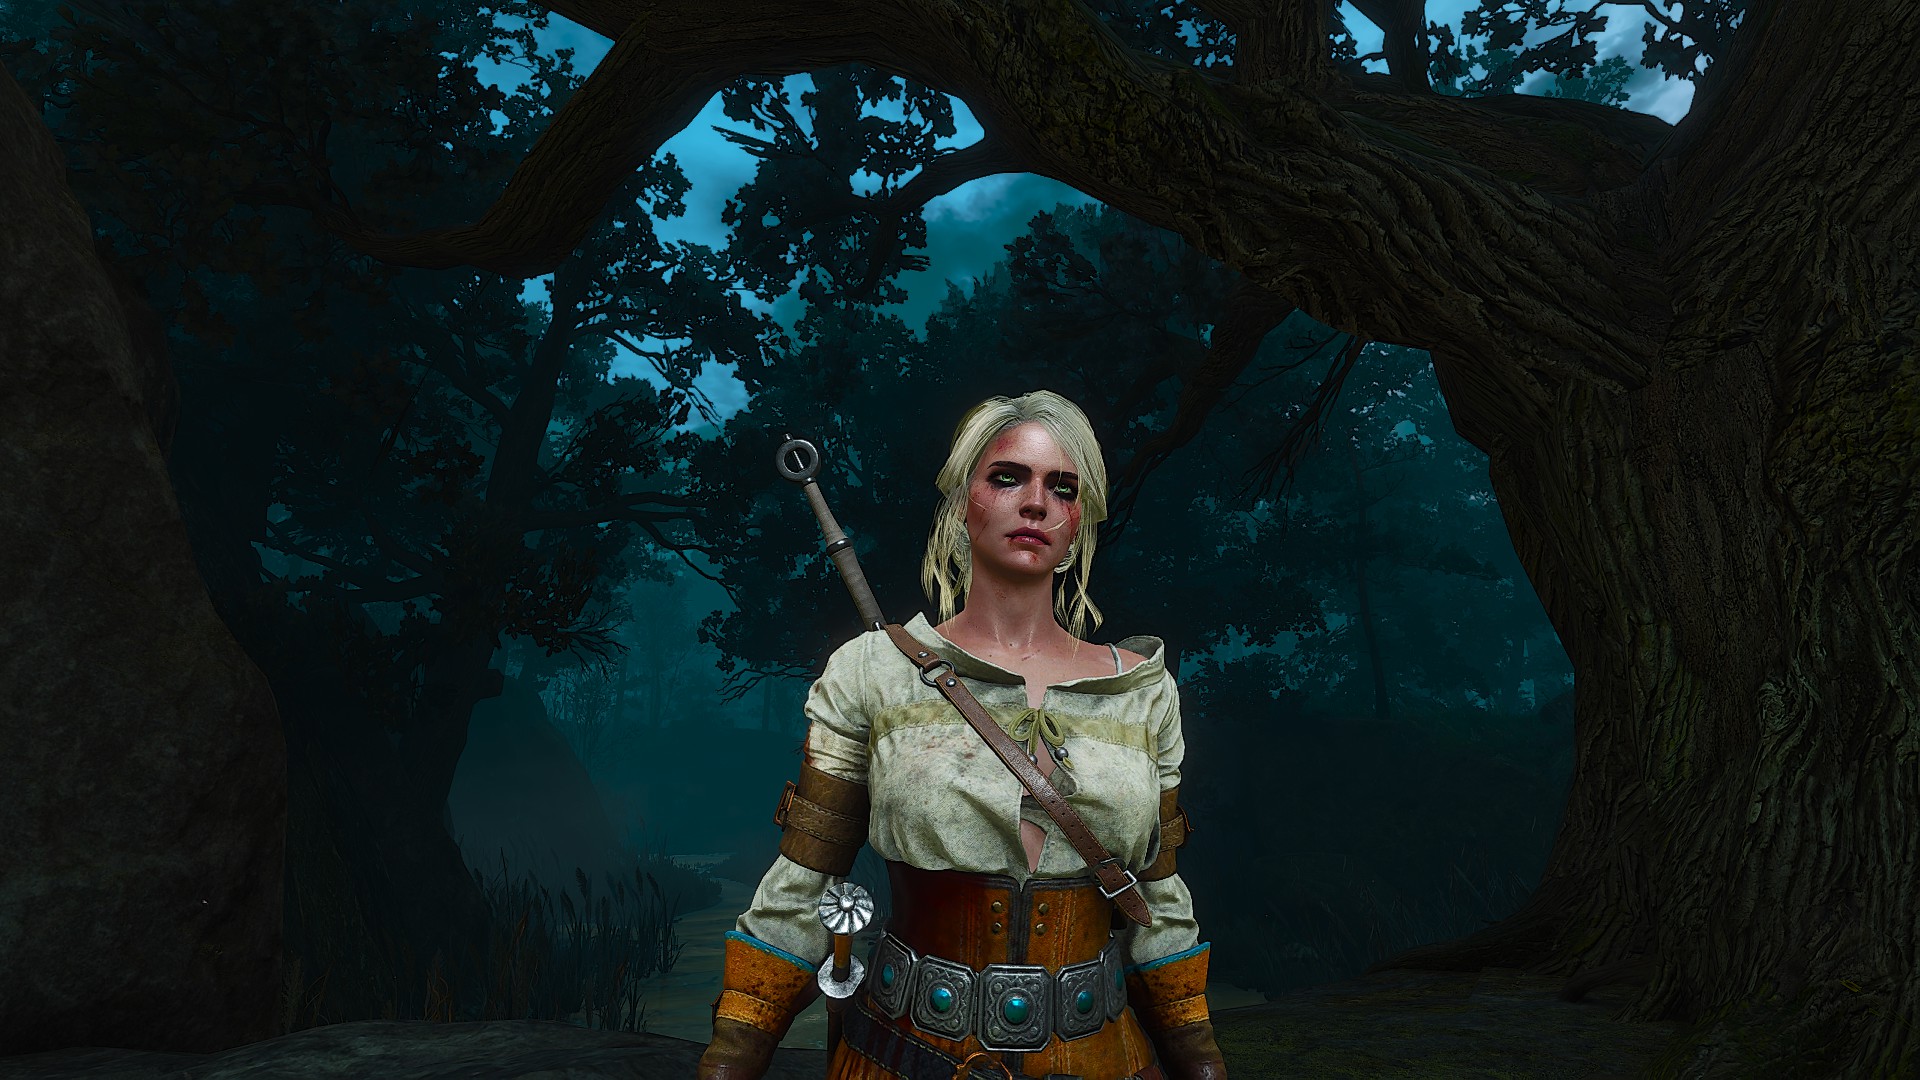 General 1920x1080 The Witcher 3: Wild Hunt - Blood and Wine Cirilla Fiona Elen Riannon screen shot video games CD Projekt RED standing video game characters CGI trees video game girls book characters blood women outdoors injured nature women with swords sword video game art